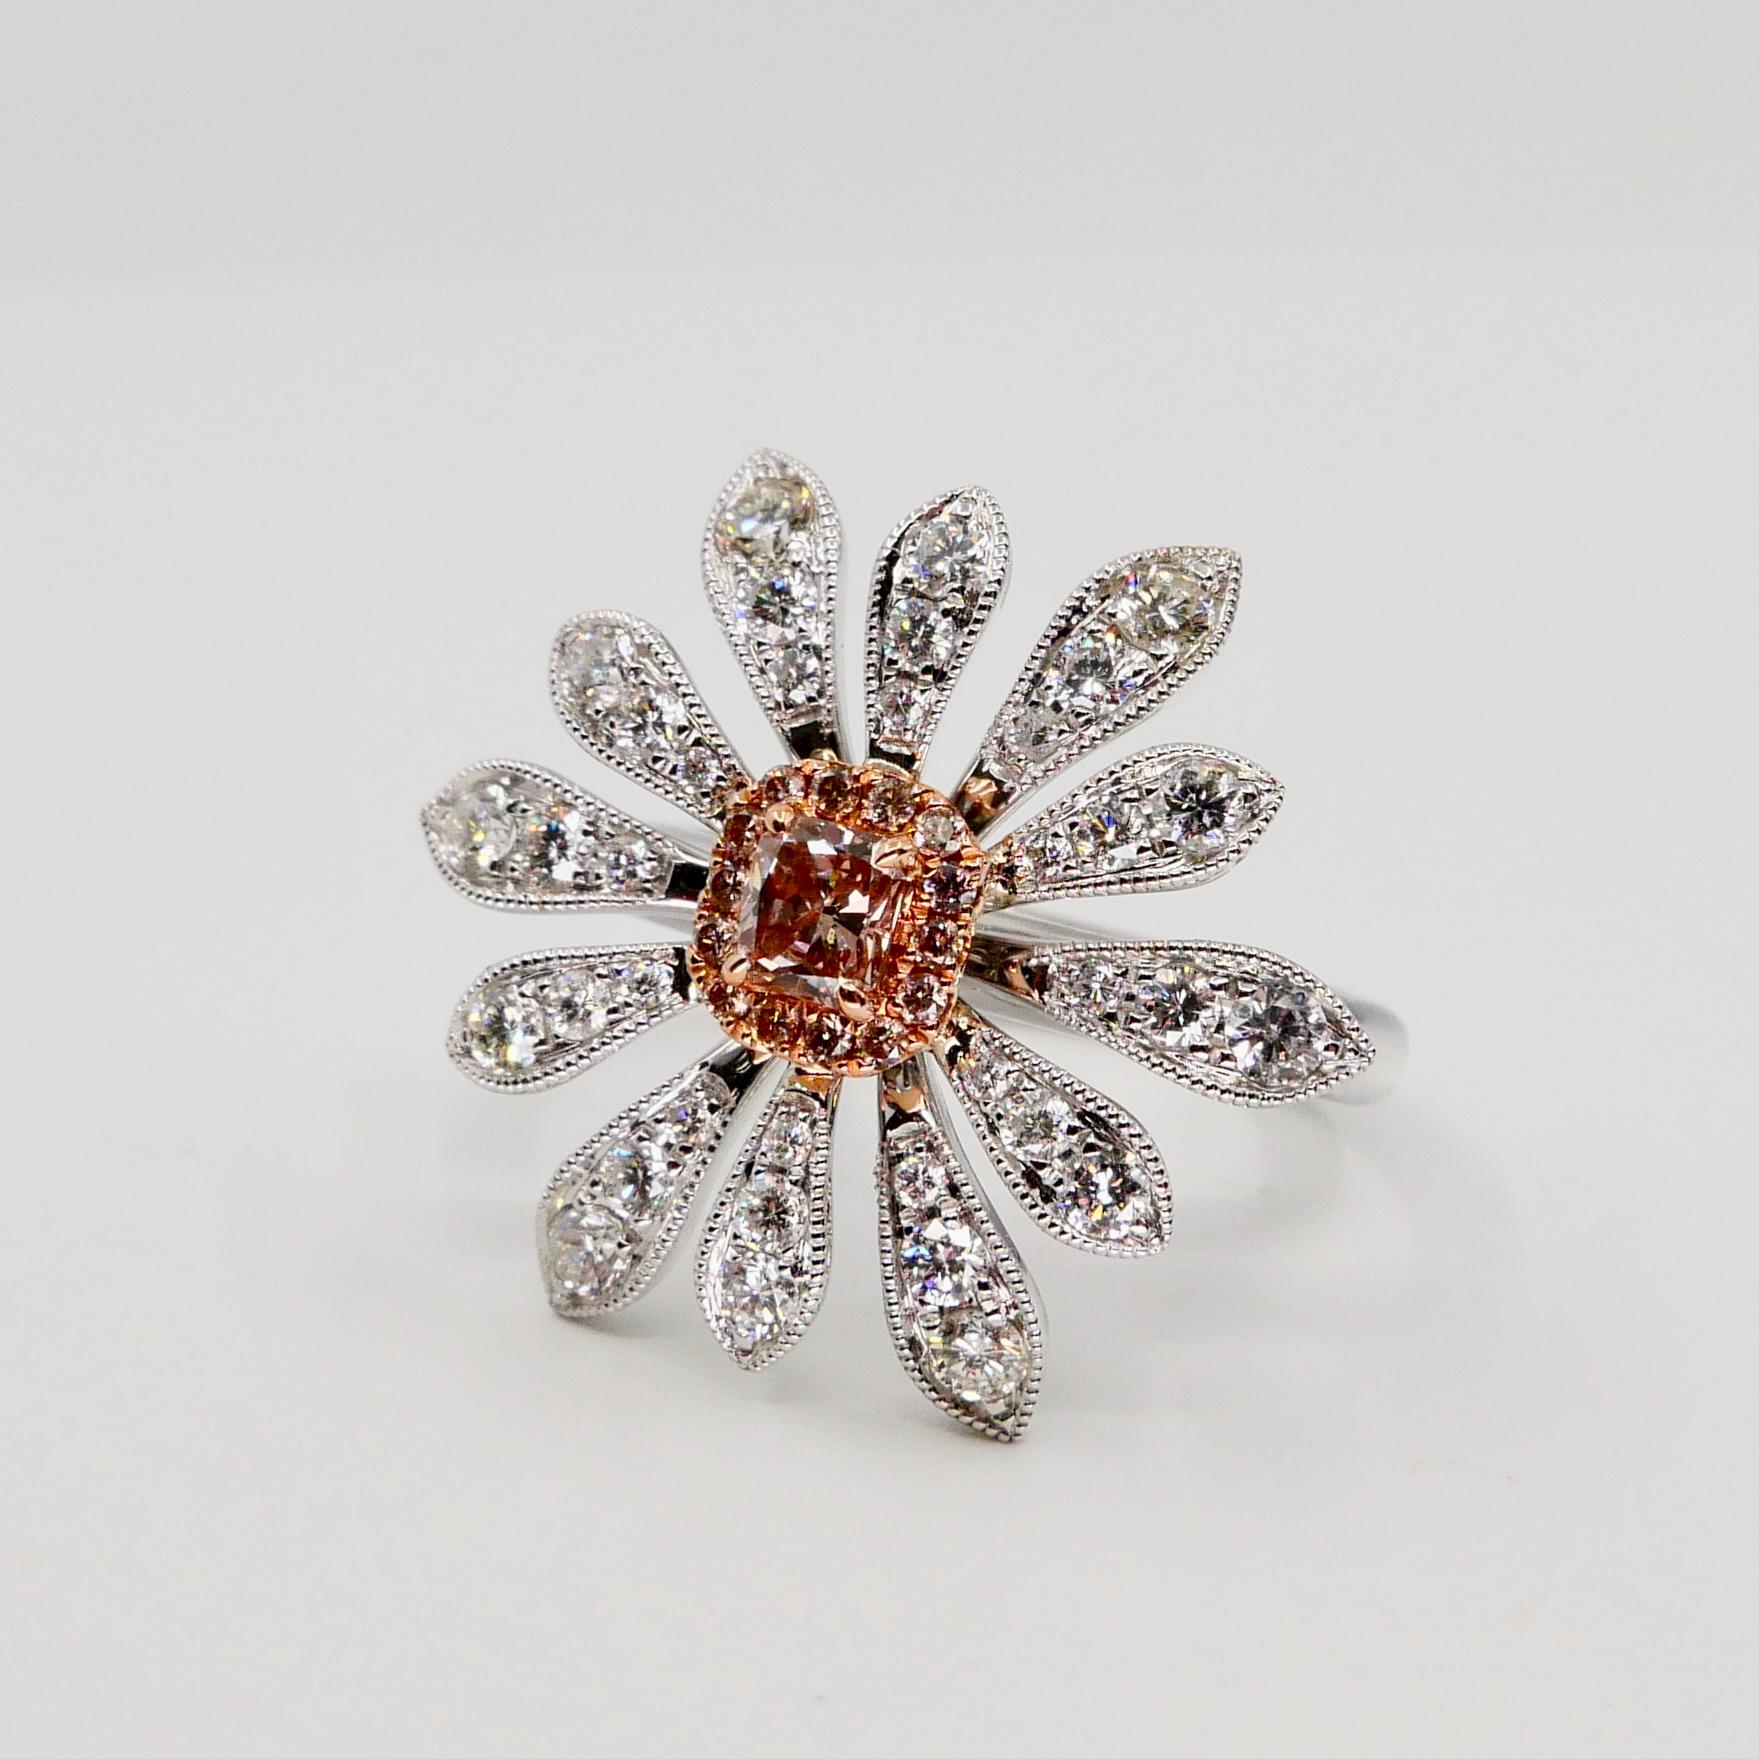 0.26 Carat Natural Fancy Pink Diamond and White Diamond Flower Cocktail Ring For Sale 2